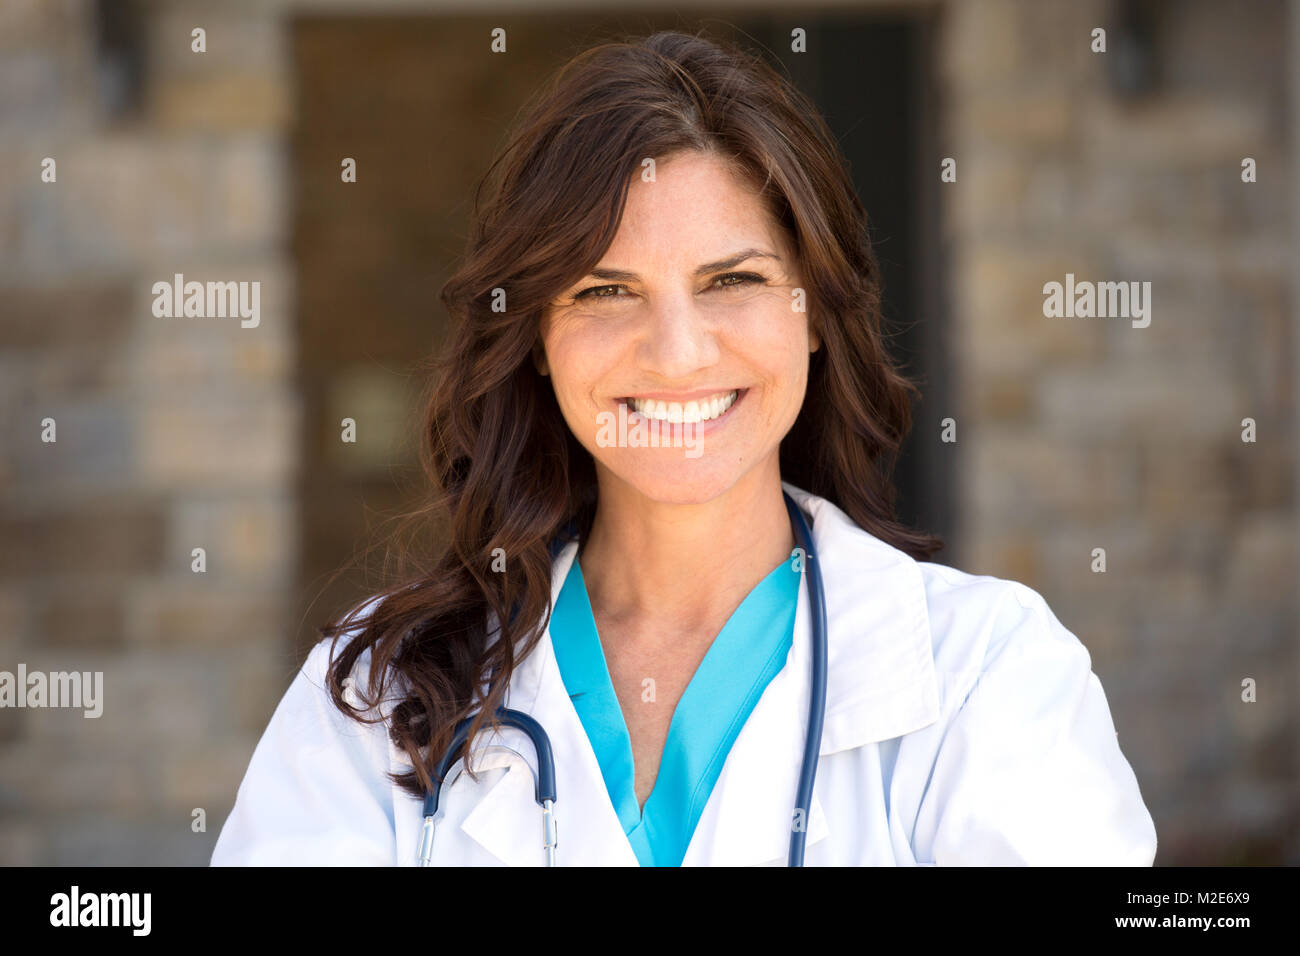 Healthcare worker standing outside the hospital. Stock Photo